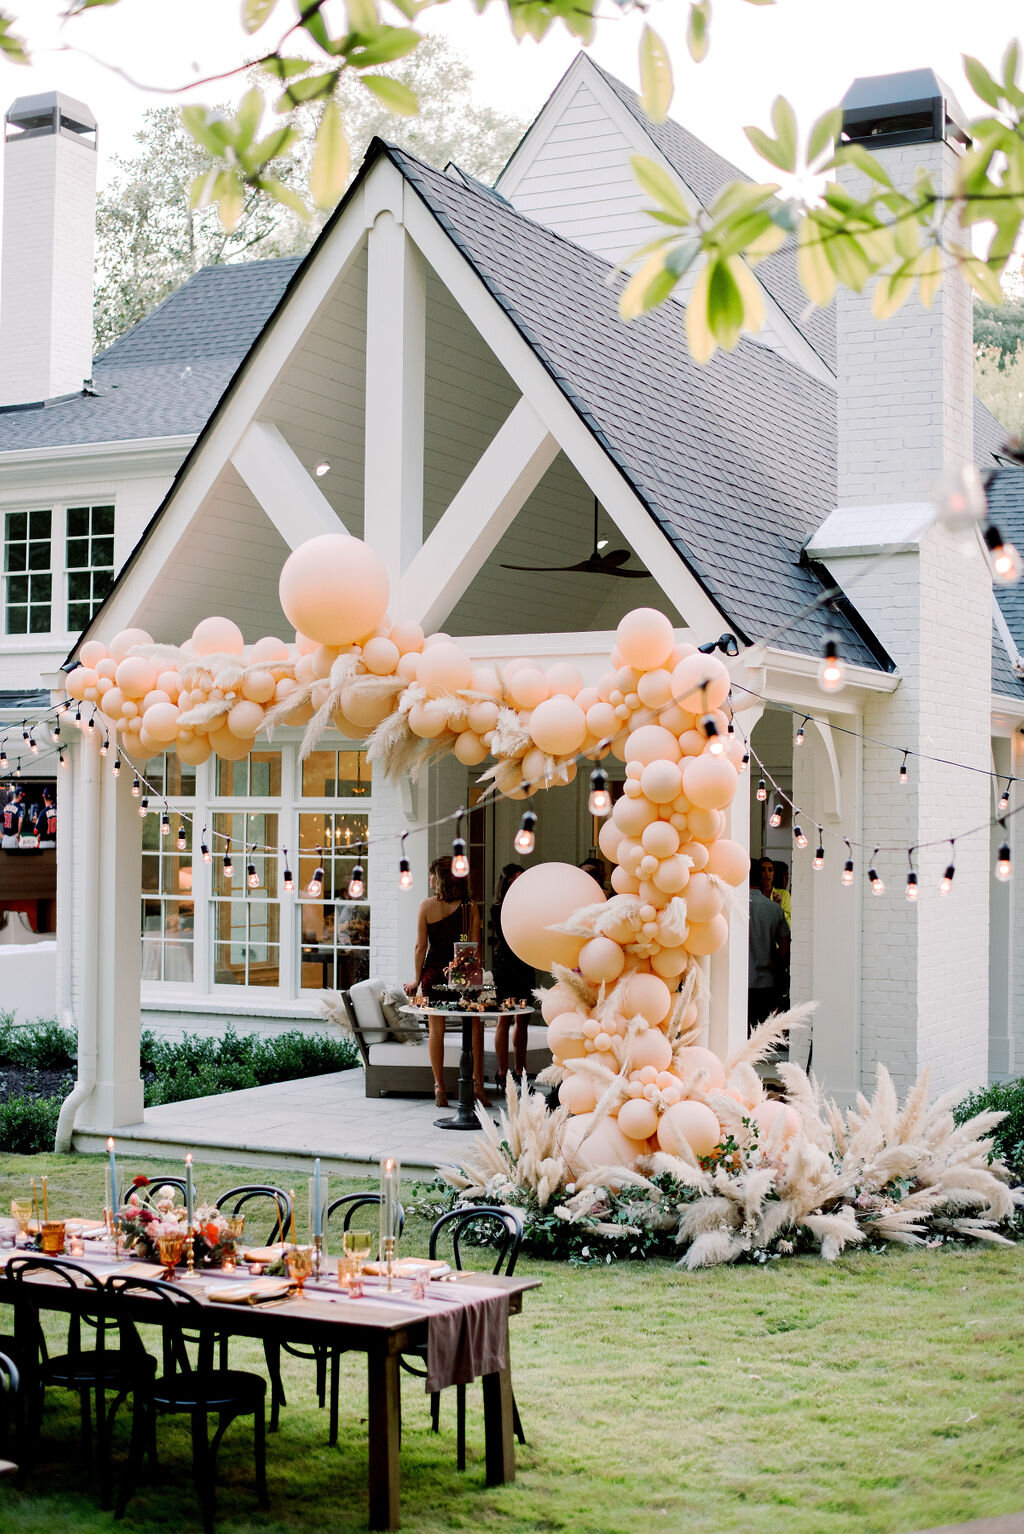 Backyard Dinner Party with Balloon Installation | Simply Charming Socials | Atlanta Event Planner